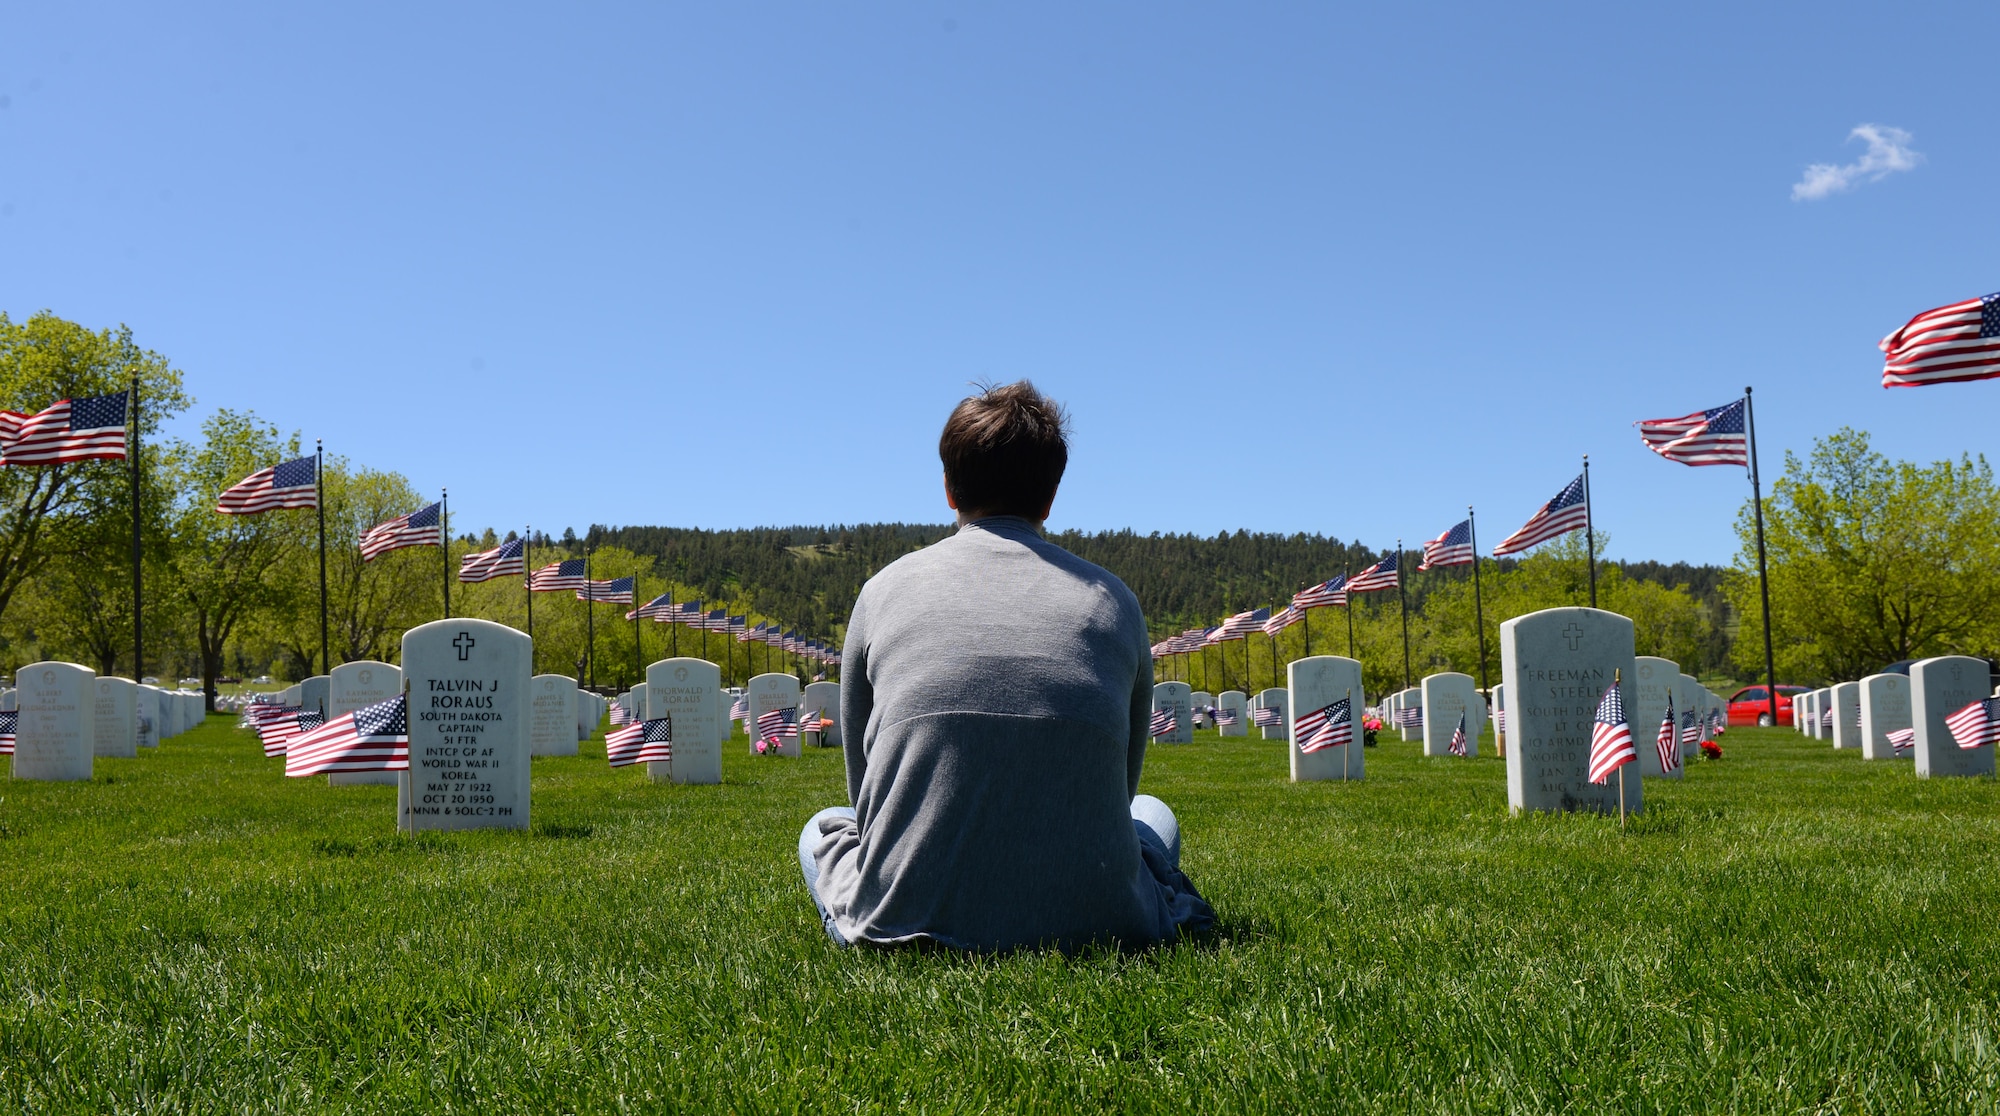 Staff Sgt. Sarah Denewellis, a broadcast journeyman assigned to the 28th Bomb Wing Staff, honors fallen service members during Memorial Day at the Black Hills National Cemetery, S.D., May 29, 2017. Ellsworth Airmen honored their fallen brethren by directing traffic, helping families find gravesites of loved ones, or taking the time to sit with visitors and remember the sacrifices and successes of the fallen. (U.S. Air Force photo by Airman Nicolas Z. Erwin)